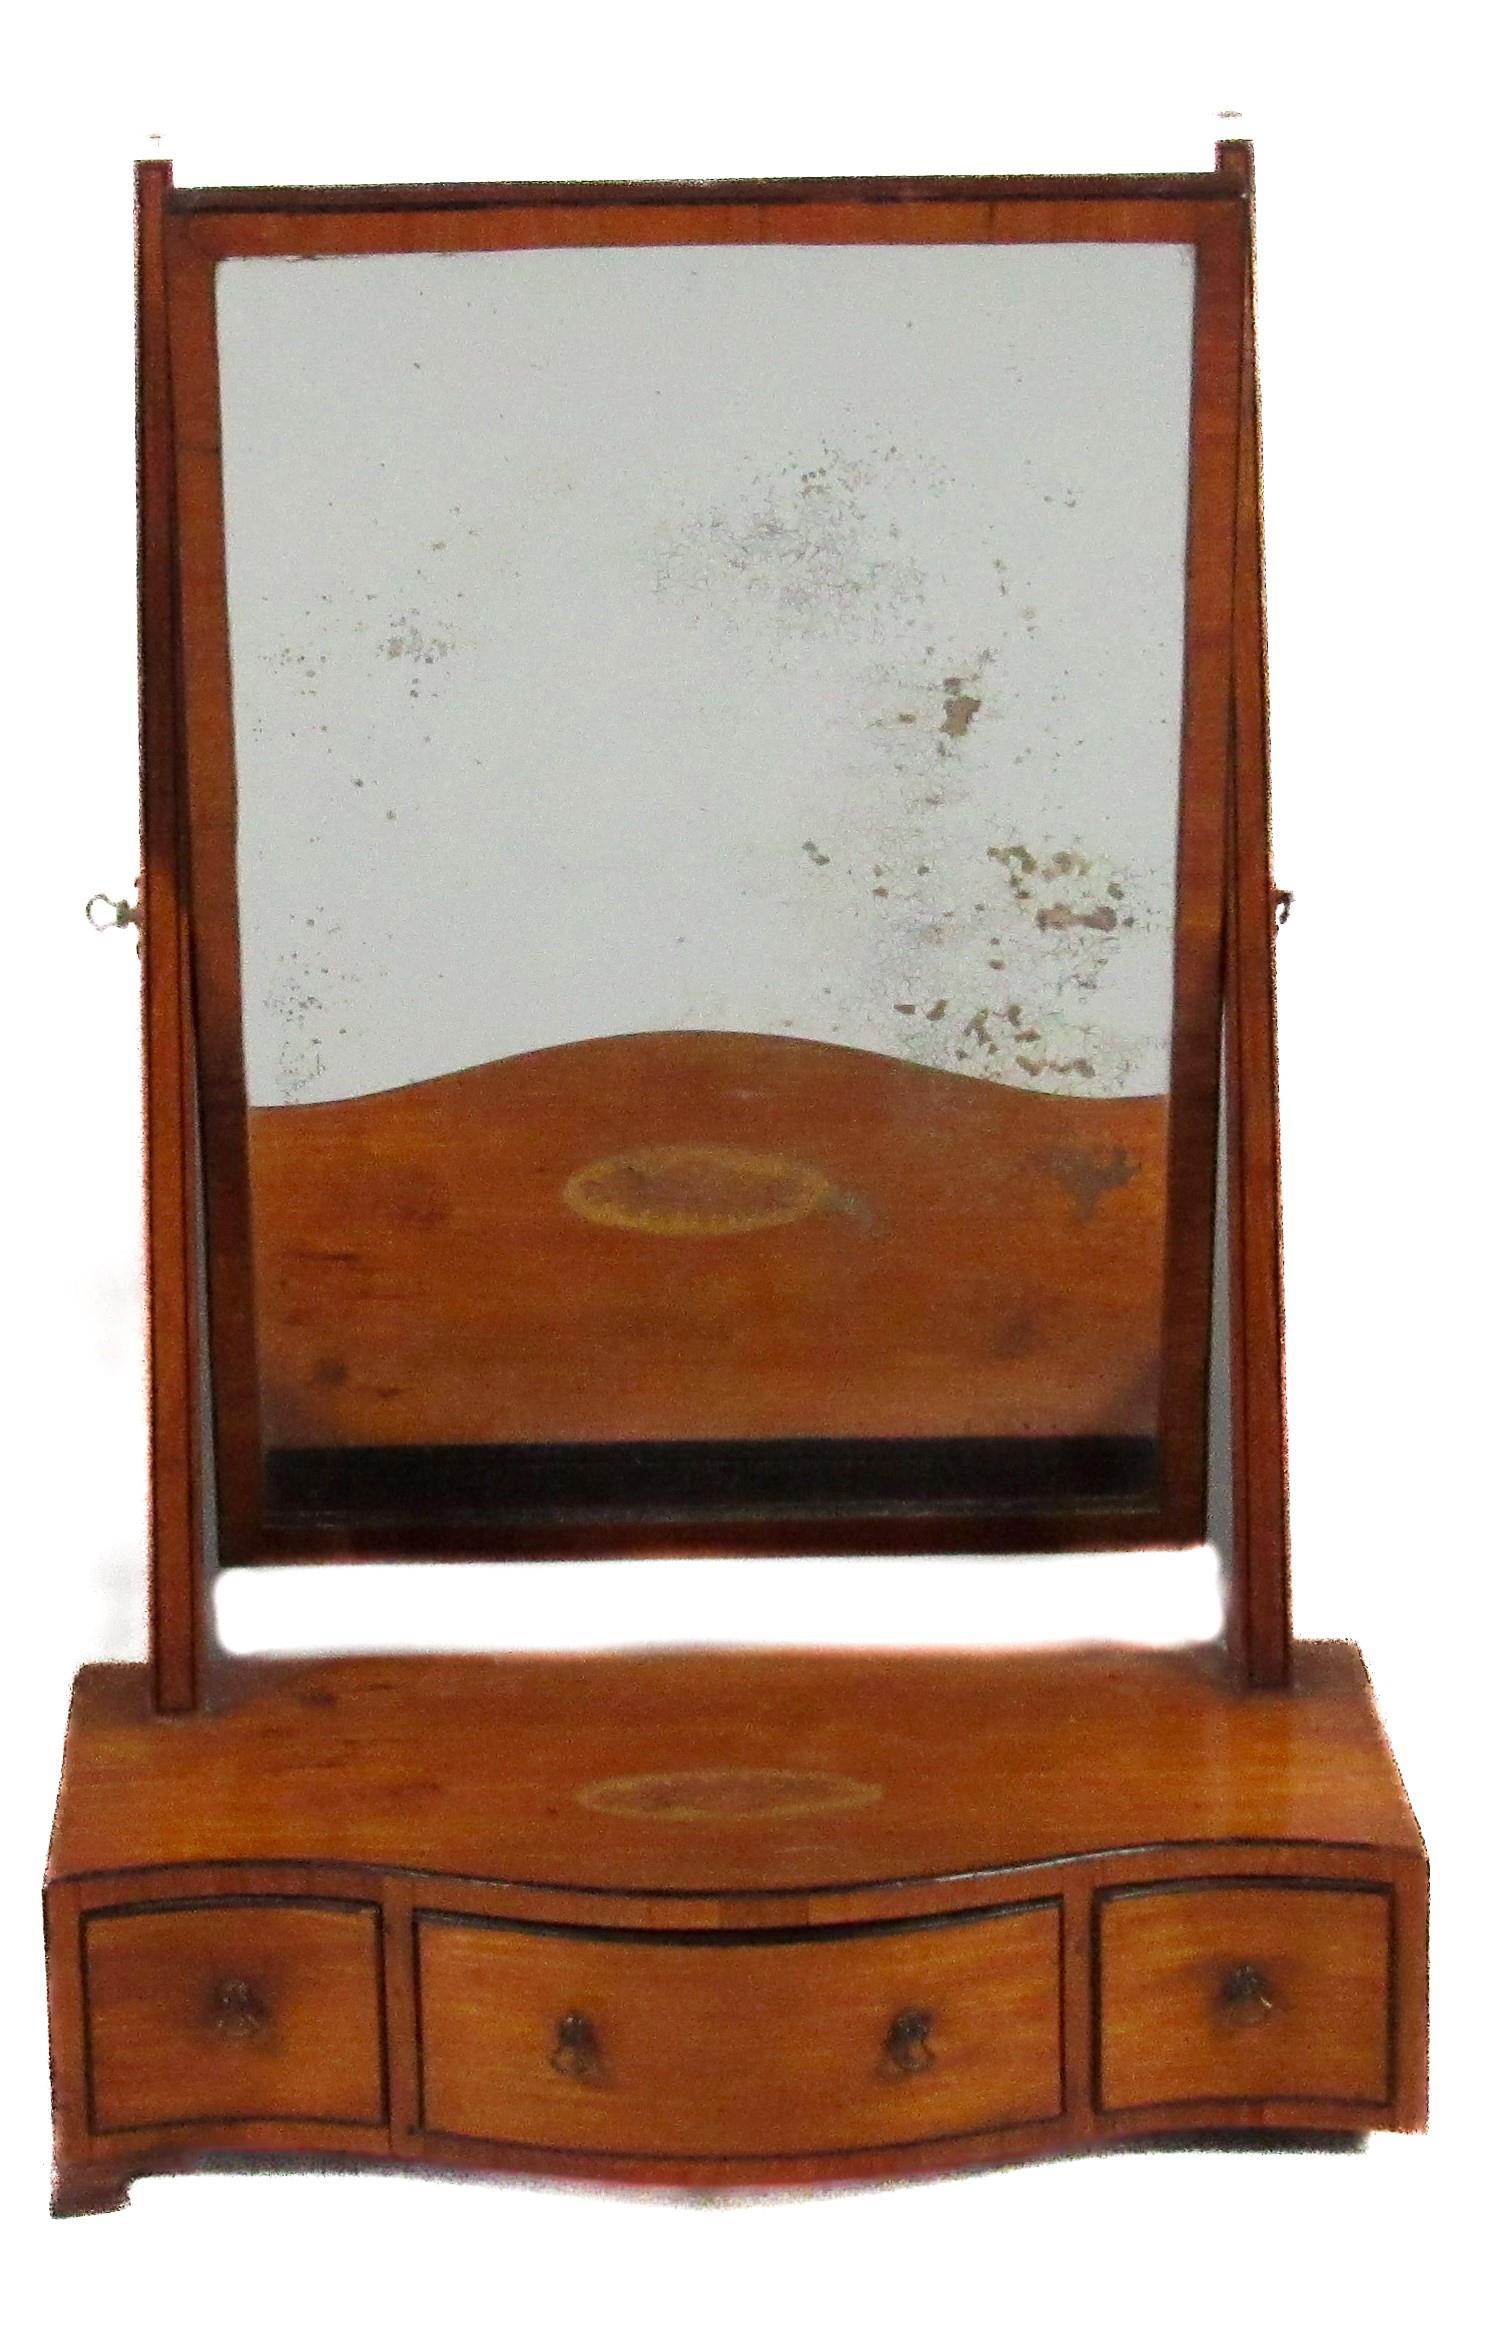 A fine quality Georgian - Sheraton design mahogany serpentine shaped Dressing Table Mirror, with